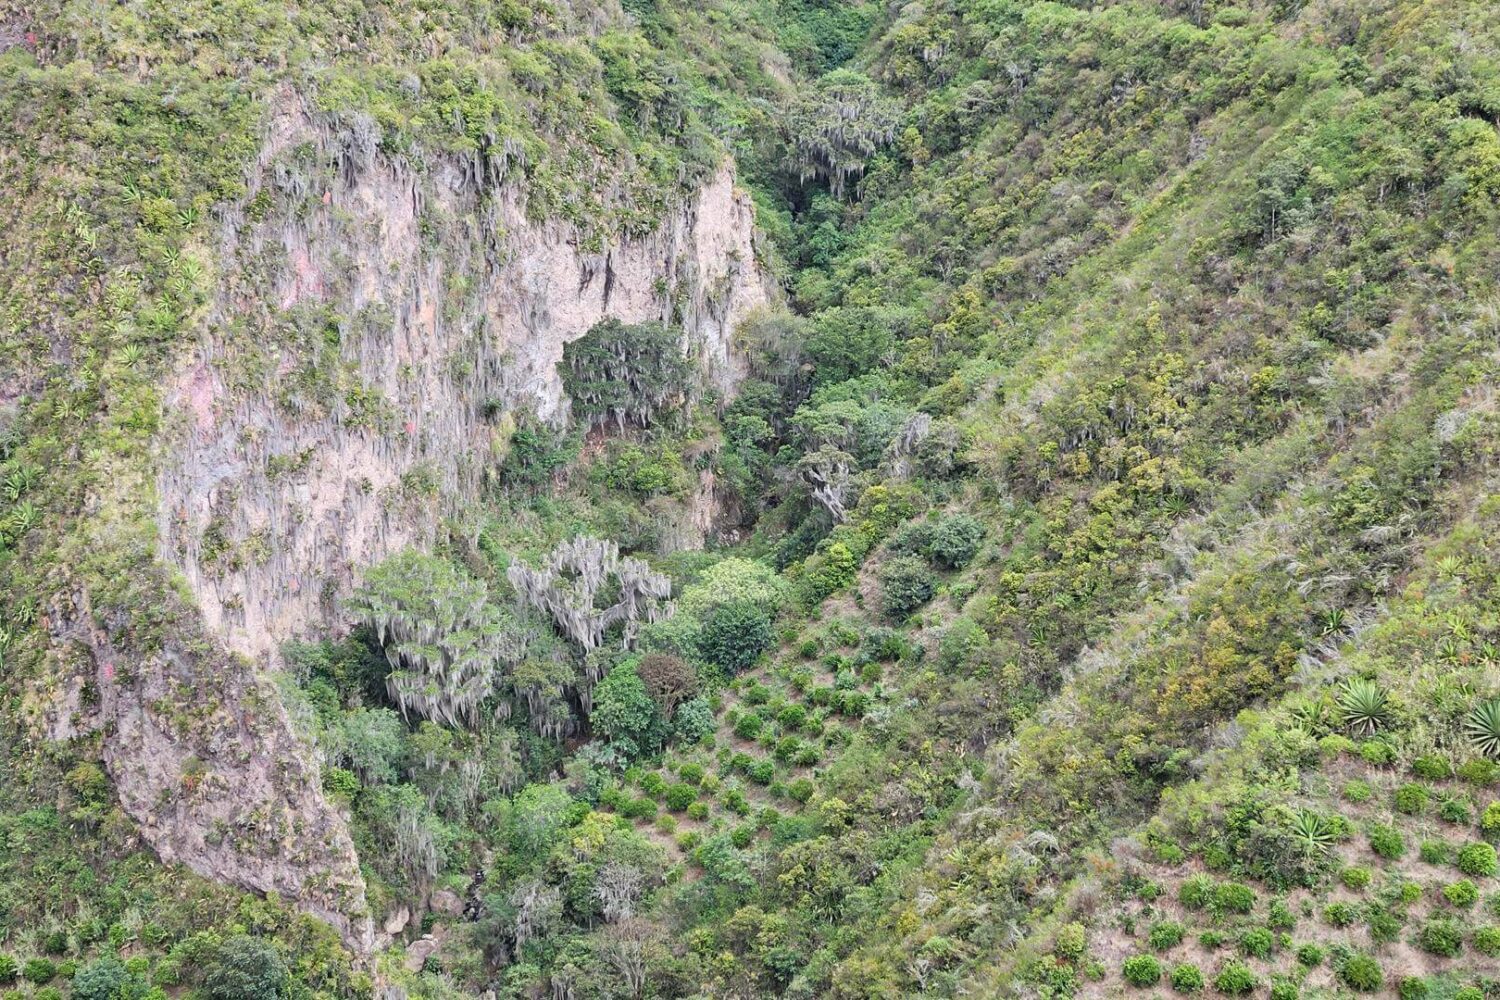 Another enchanting view from Mirador del Oso Andino. In the center of the photo, you can find trees that the bears adore: crafting cozy nests amidst the draping flora.